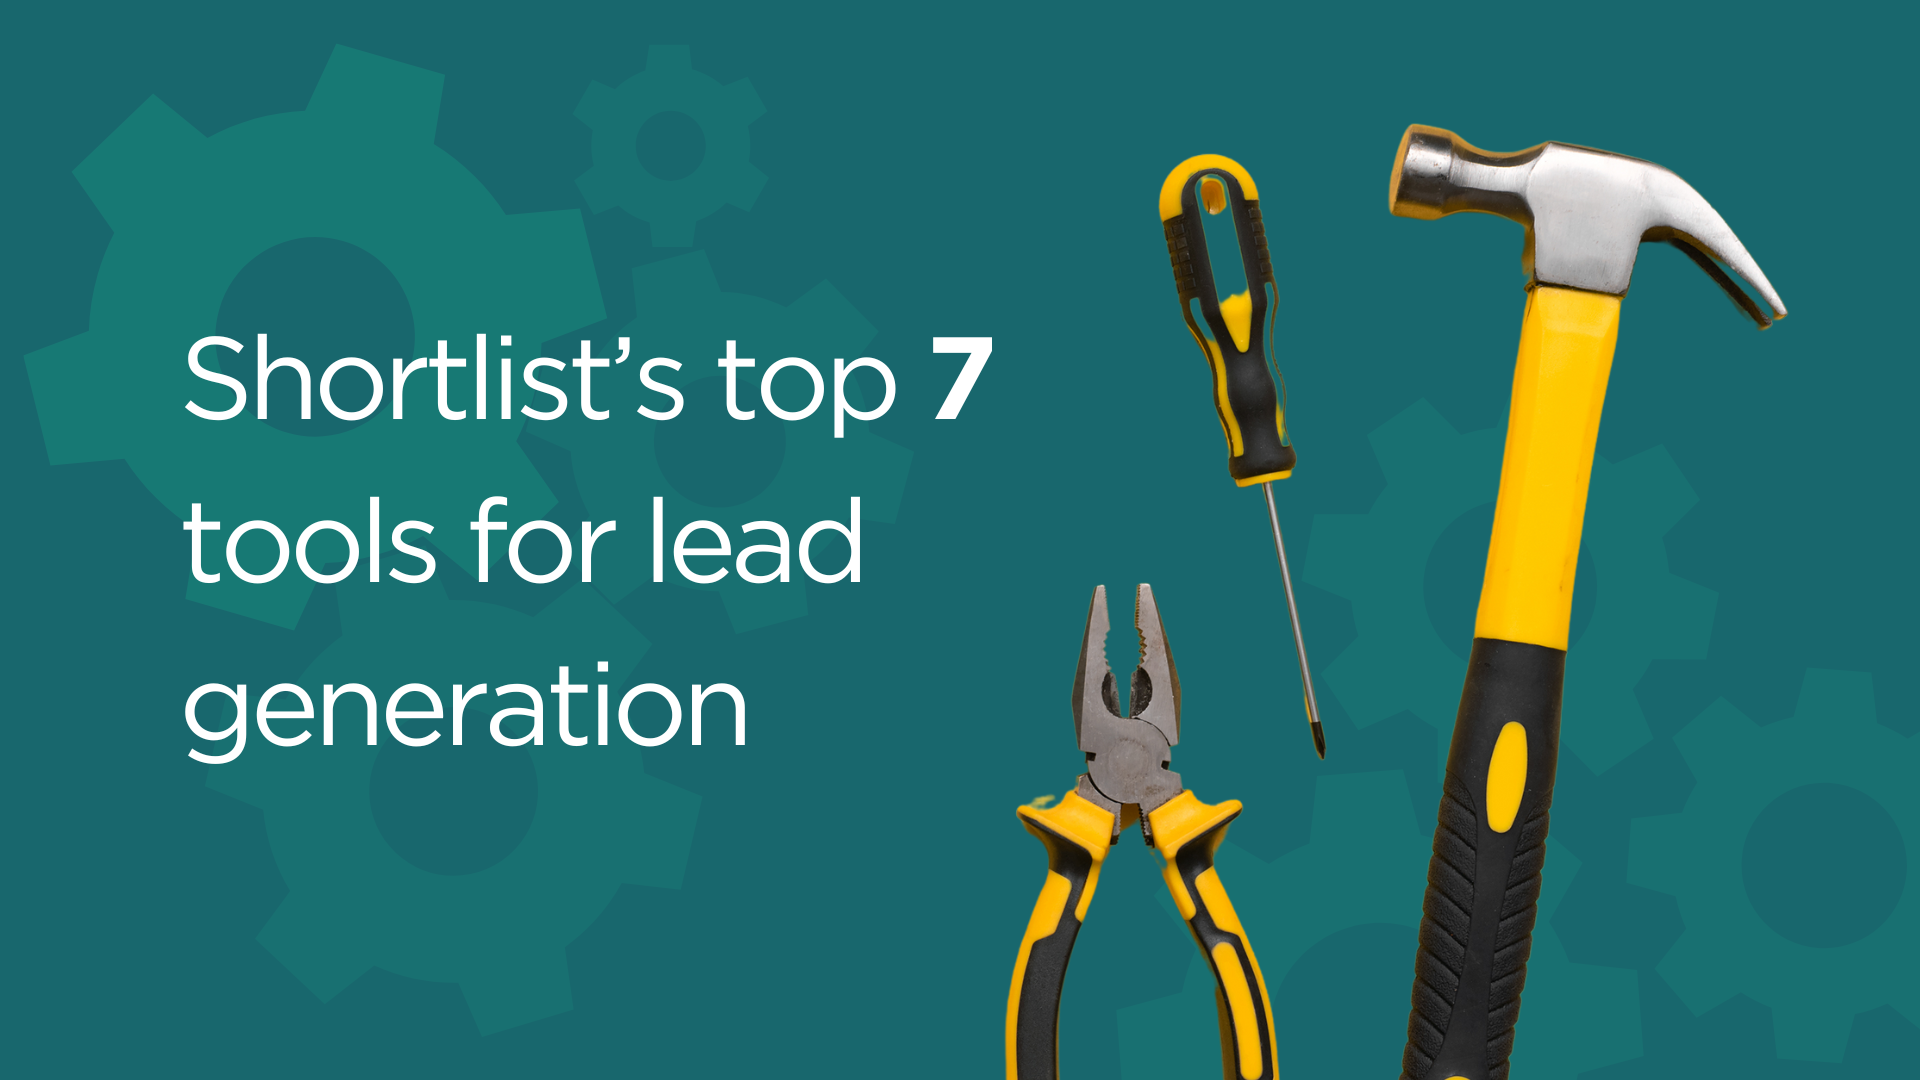 Shortlist’s top 7 tools for lead generation